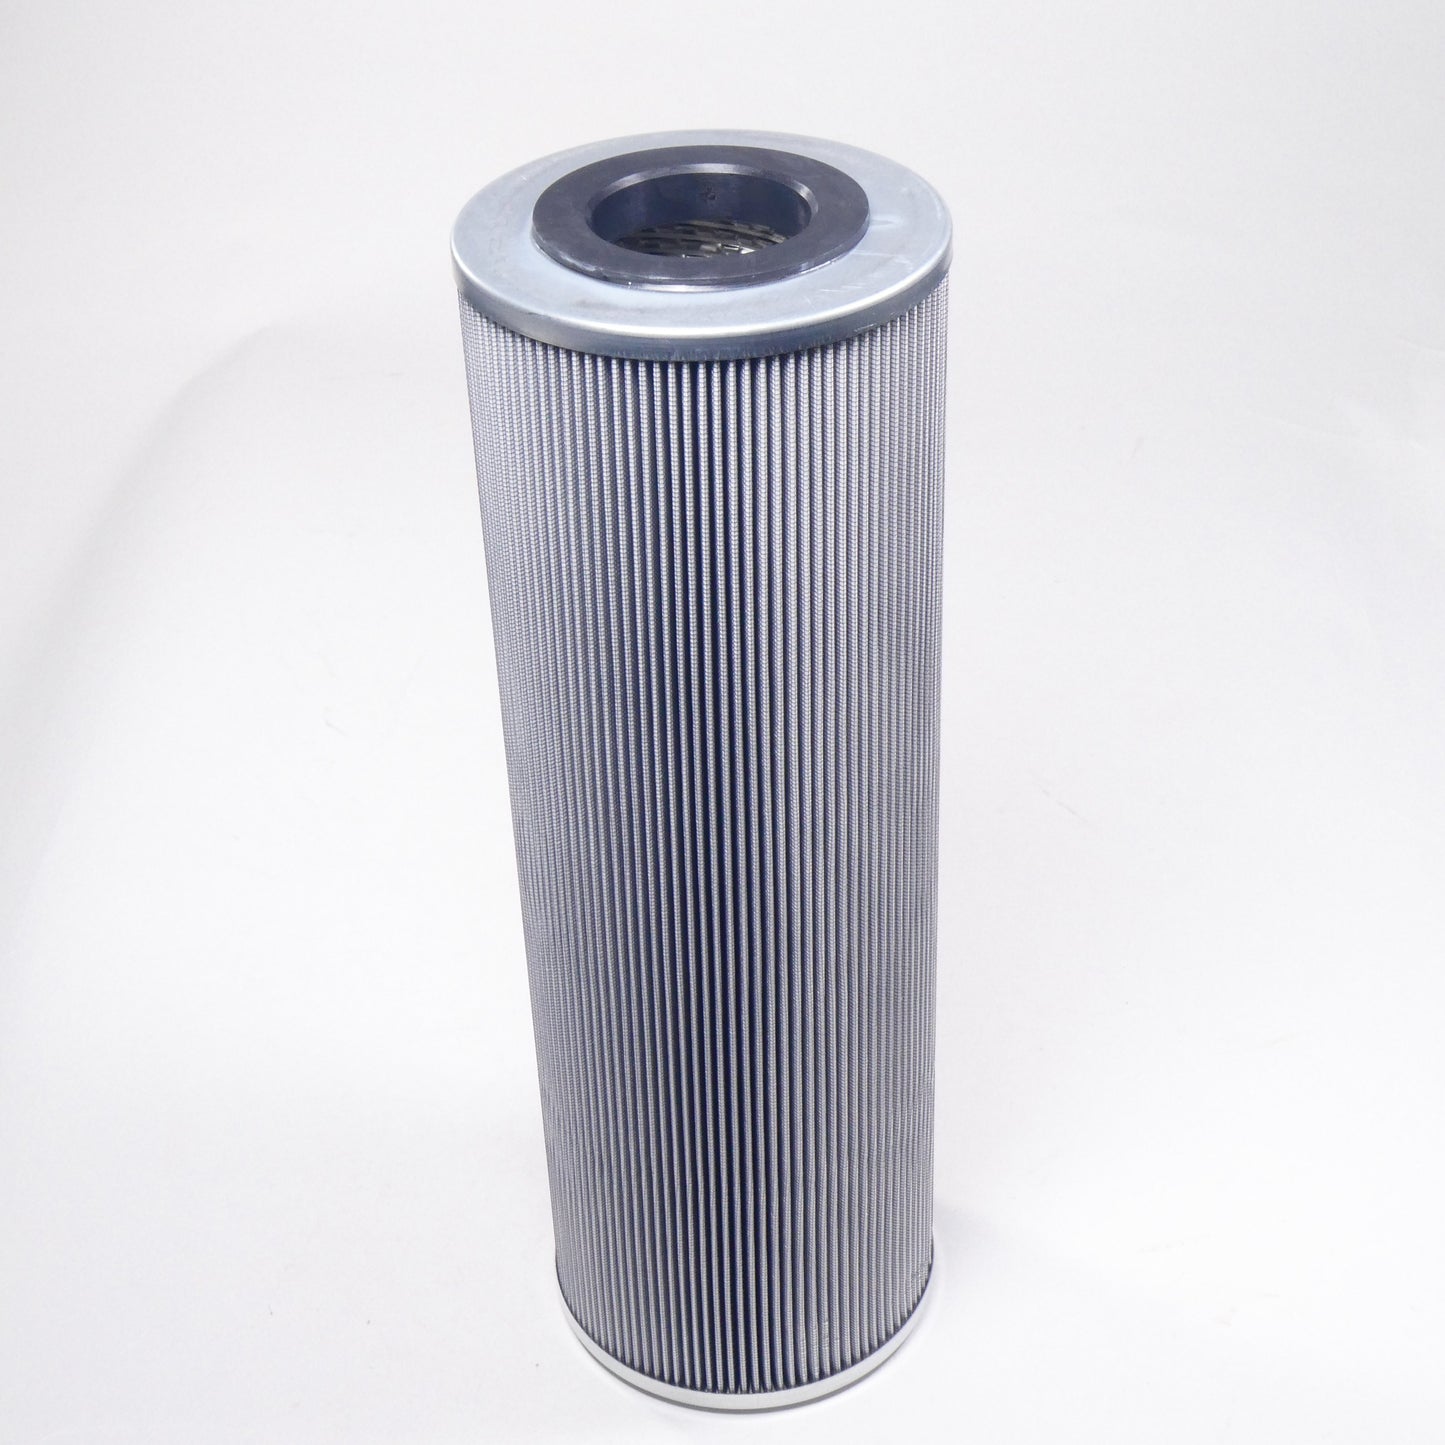 Hydrafil Replacement Filter Element for Hycoa S186-0050-V-1